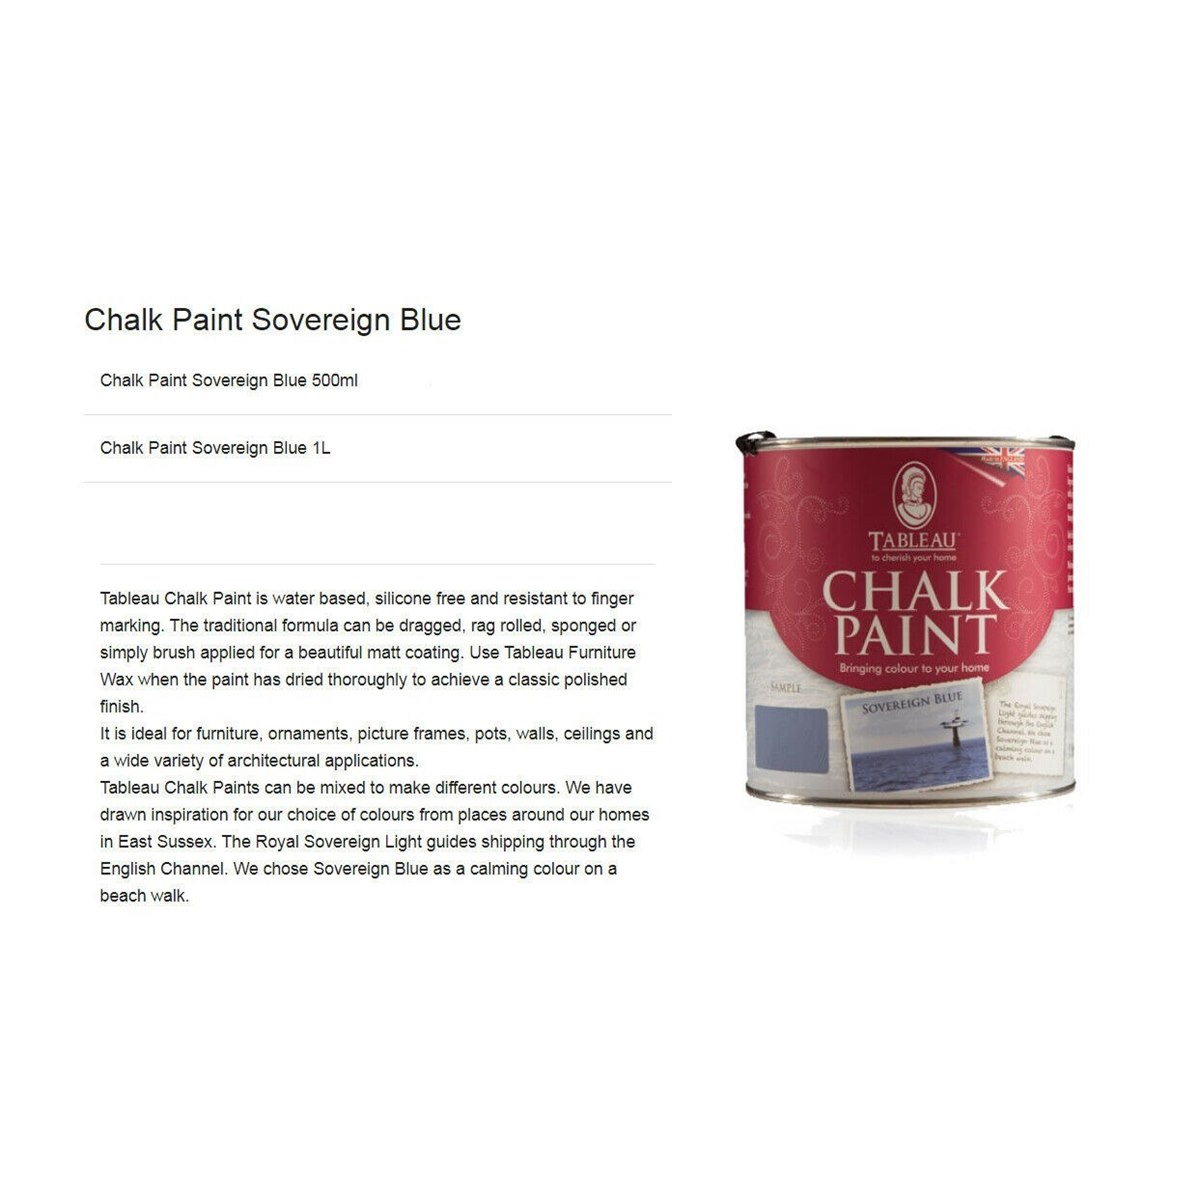 Tableau Chalky Paint Sovereign Blue